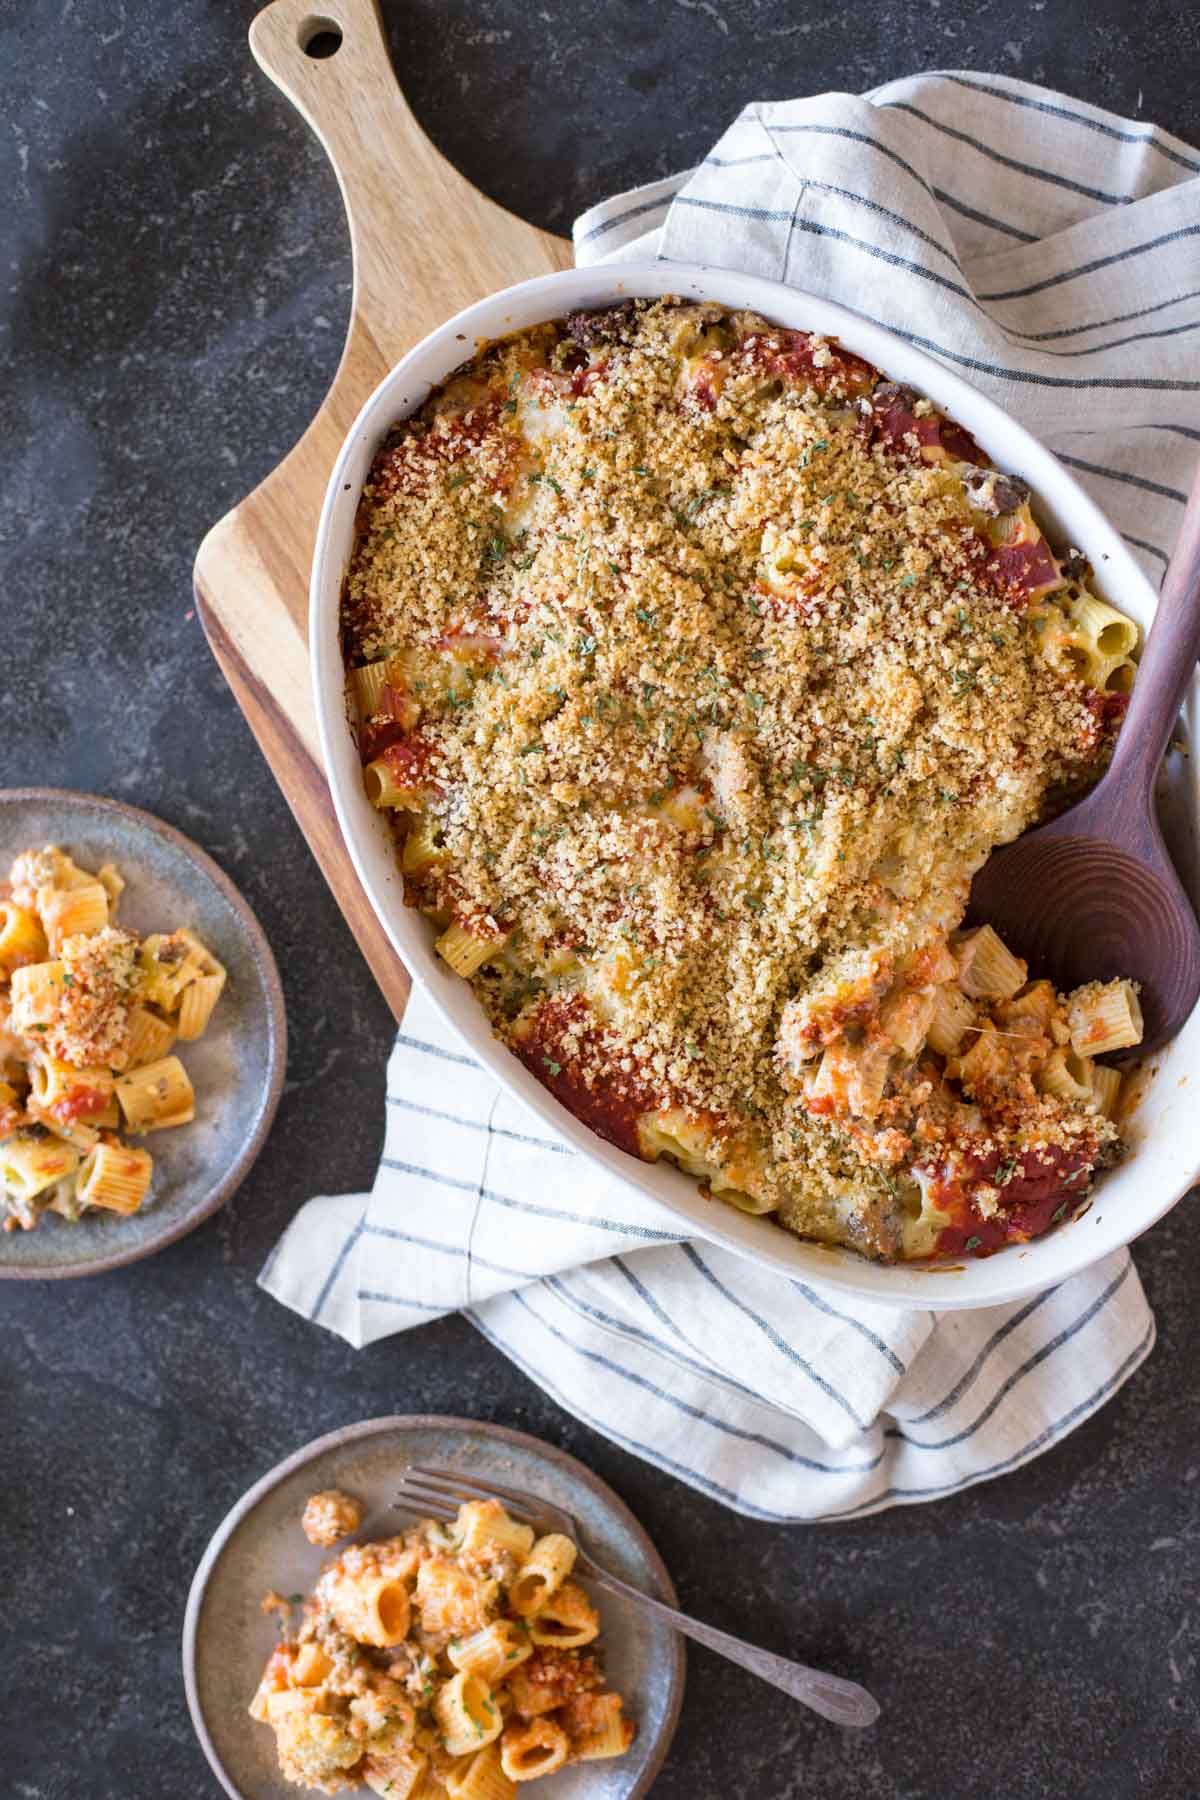 Cheesy Tomato Alfredo Pasta Bake in a baking dish with a serving spoon in it, with two plates of the Cheesy Tomato Alfredo Pasta Bake next to it.  